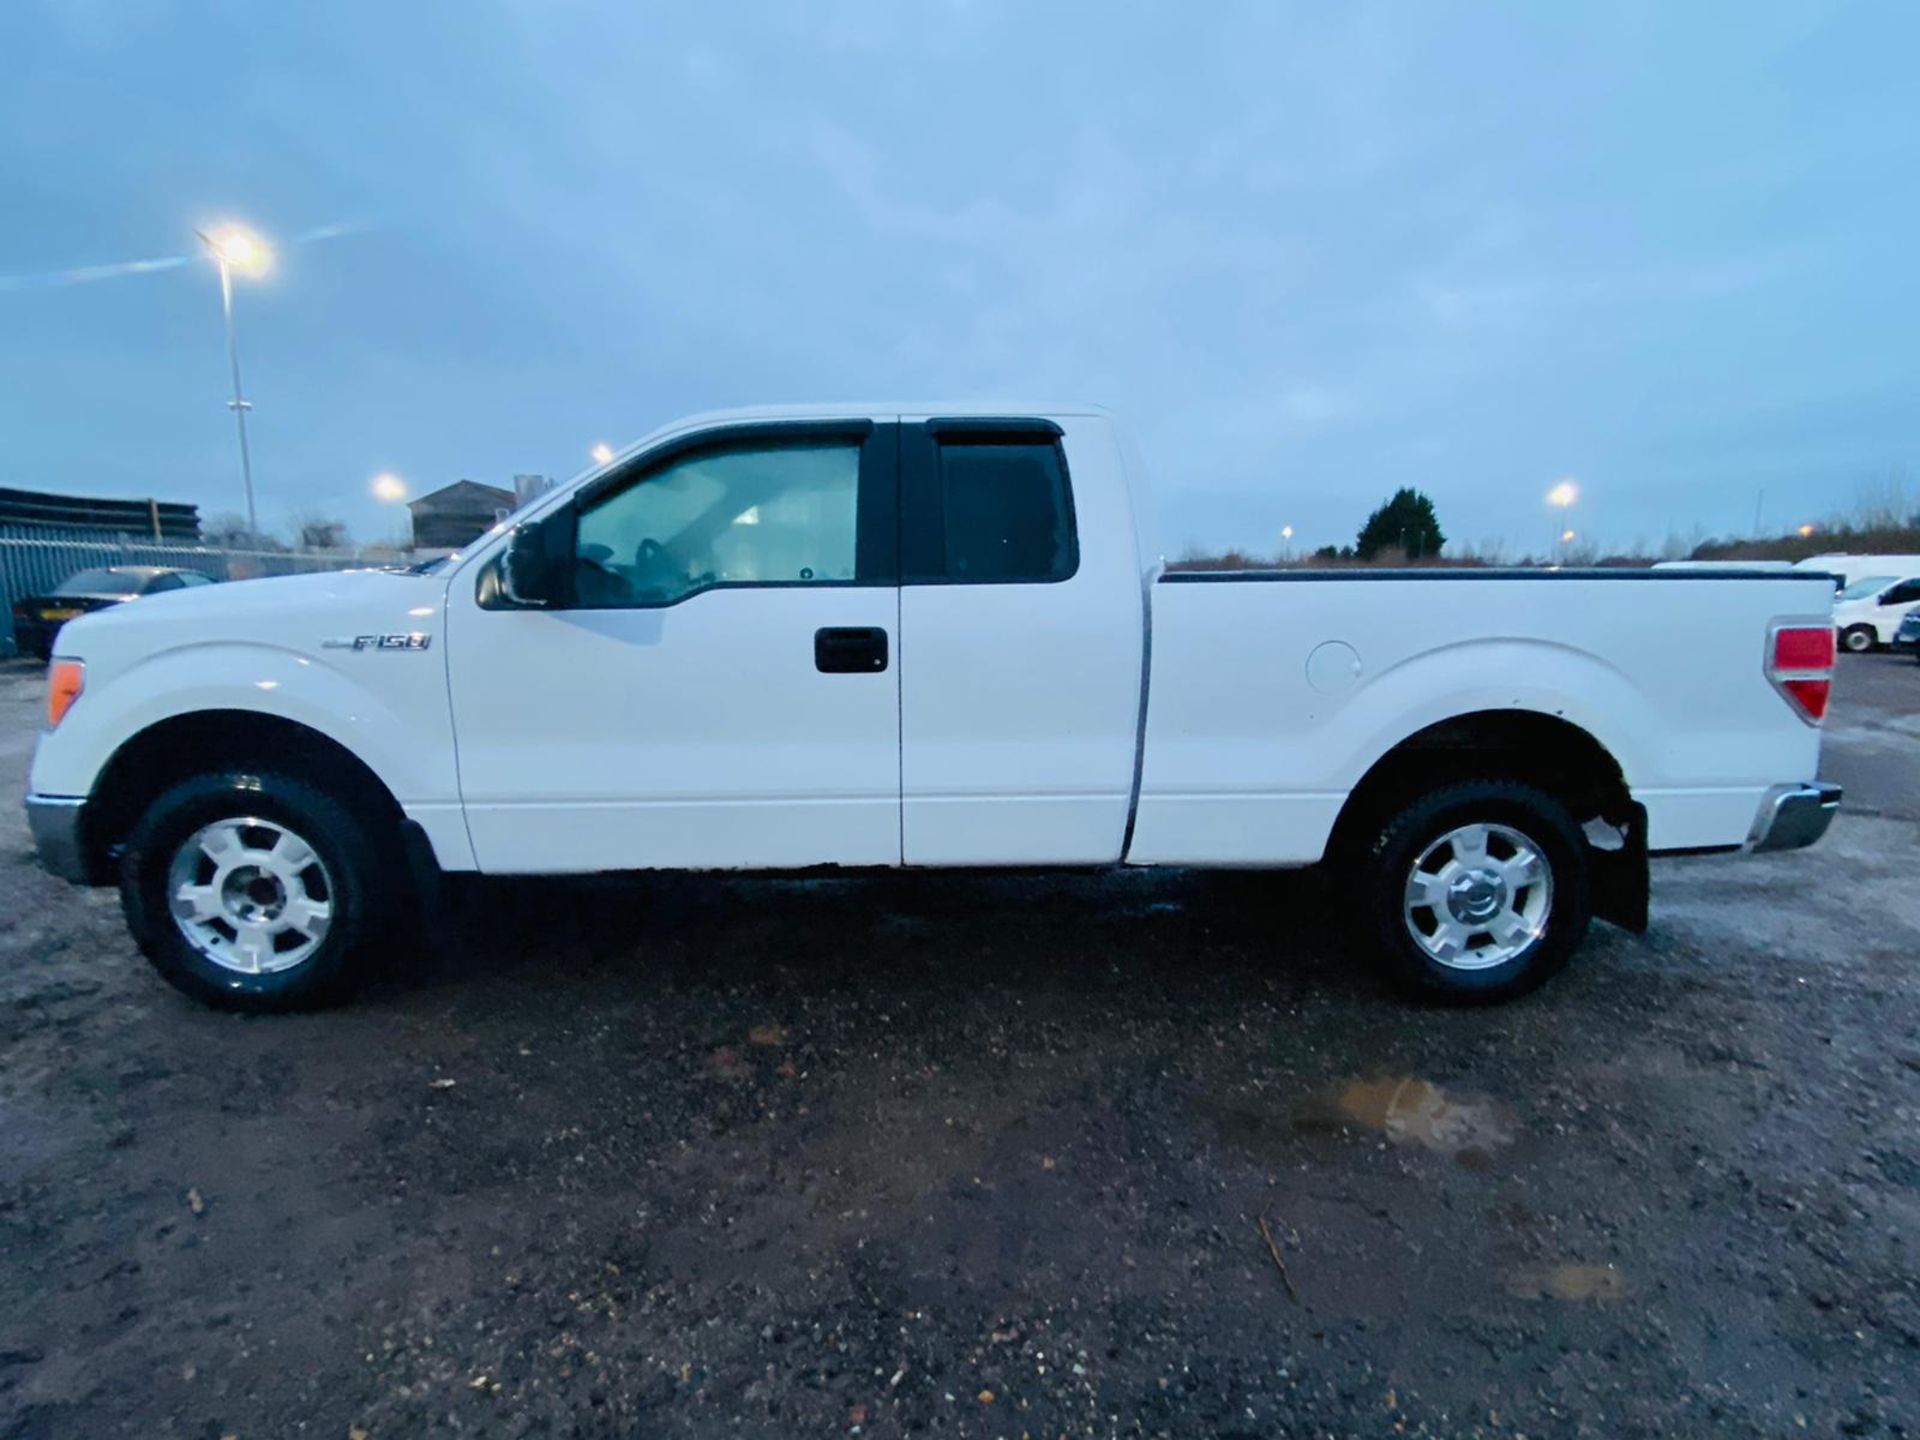 (Reserve Met)Ford F-150 XLT 3.7L V6 SuperCab - 2012 Year - 6 Seats - Air con - Fresh Import - - Image 7 of 34